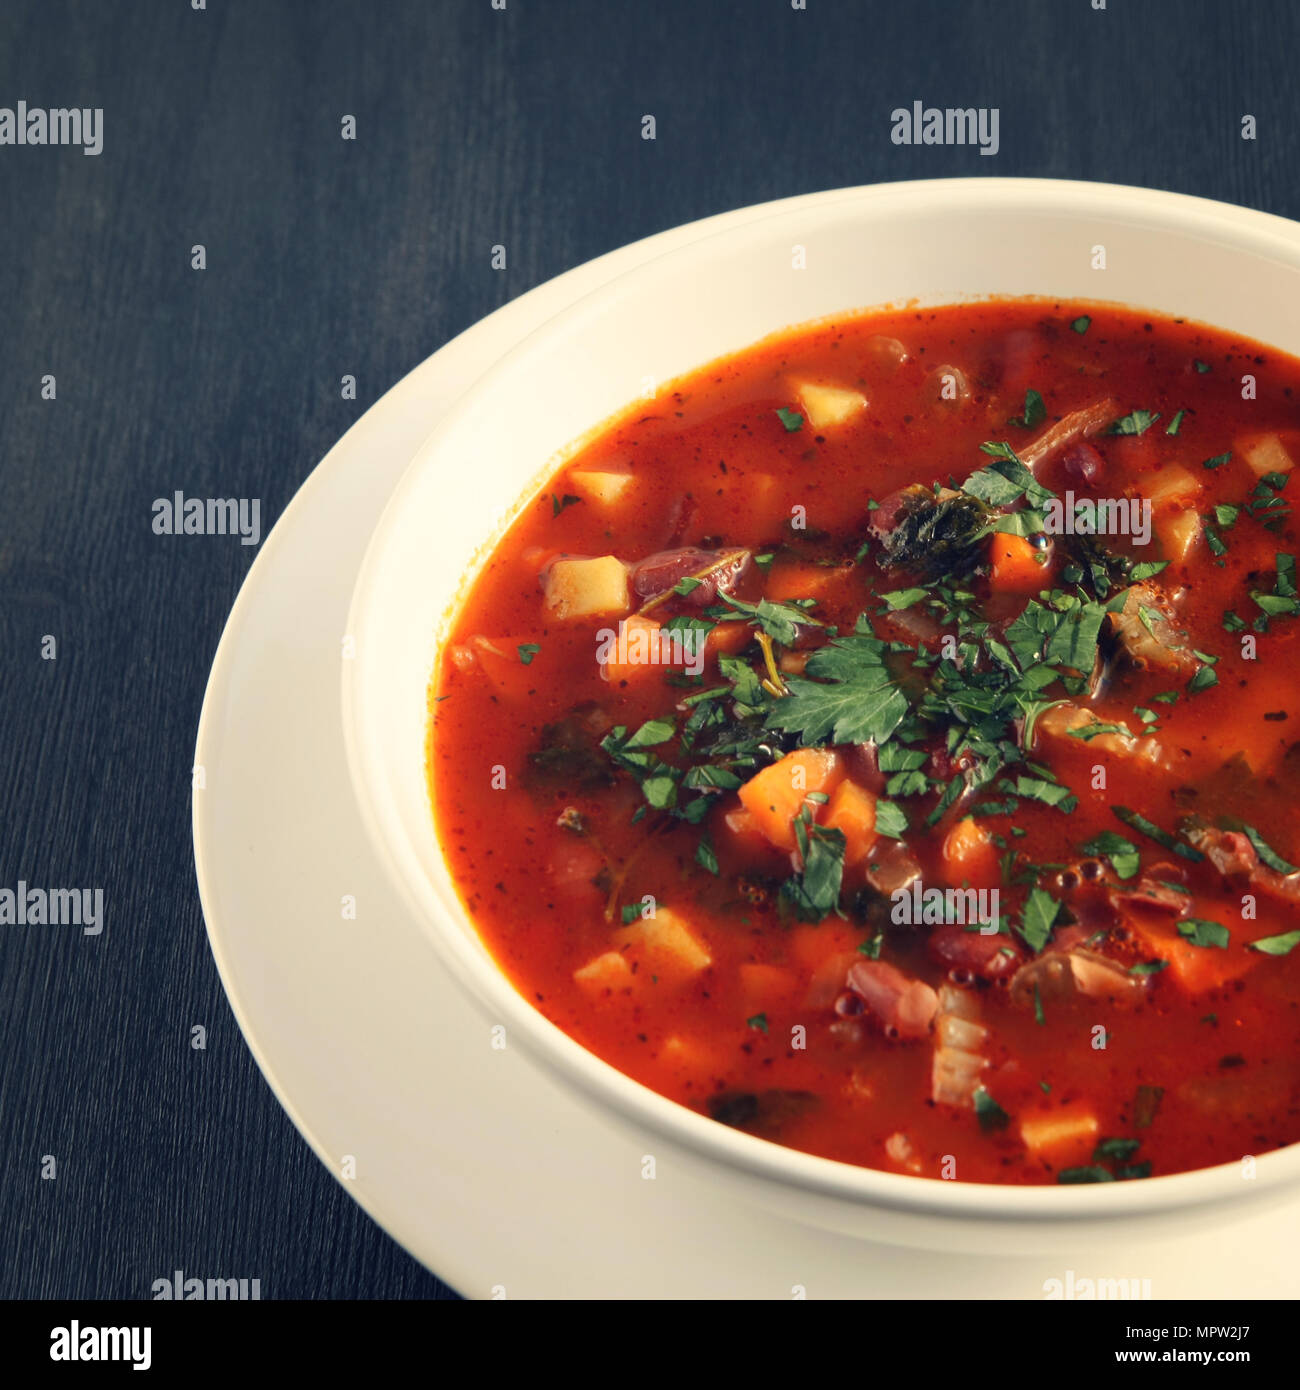 Tomato soup with red beans, potato and carrot. Vegan diet. European cuisine. Vegetarian dish. Main course. Organic meal. Toned photo. Stock Photo